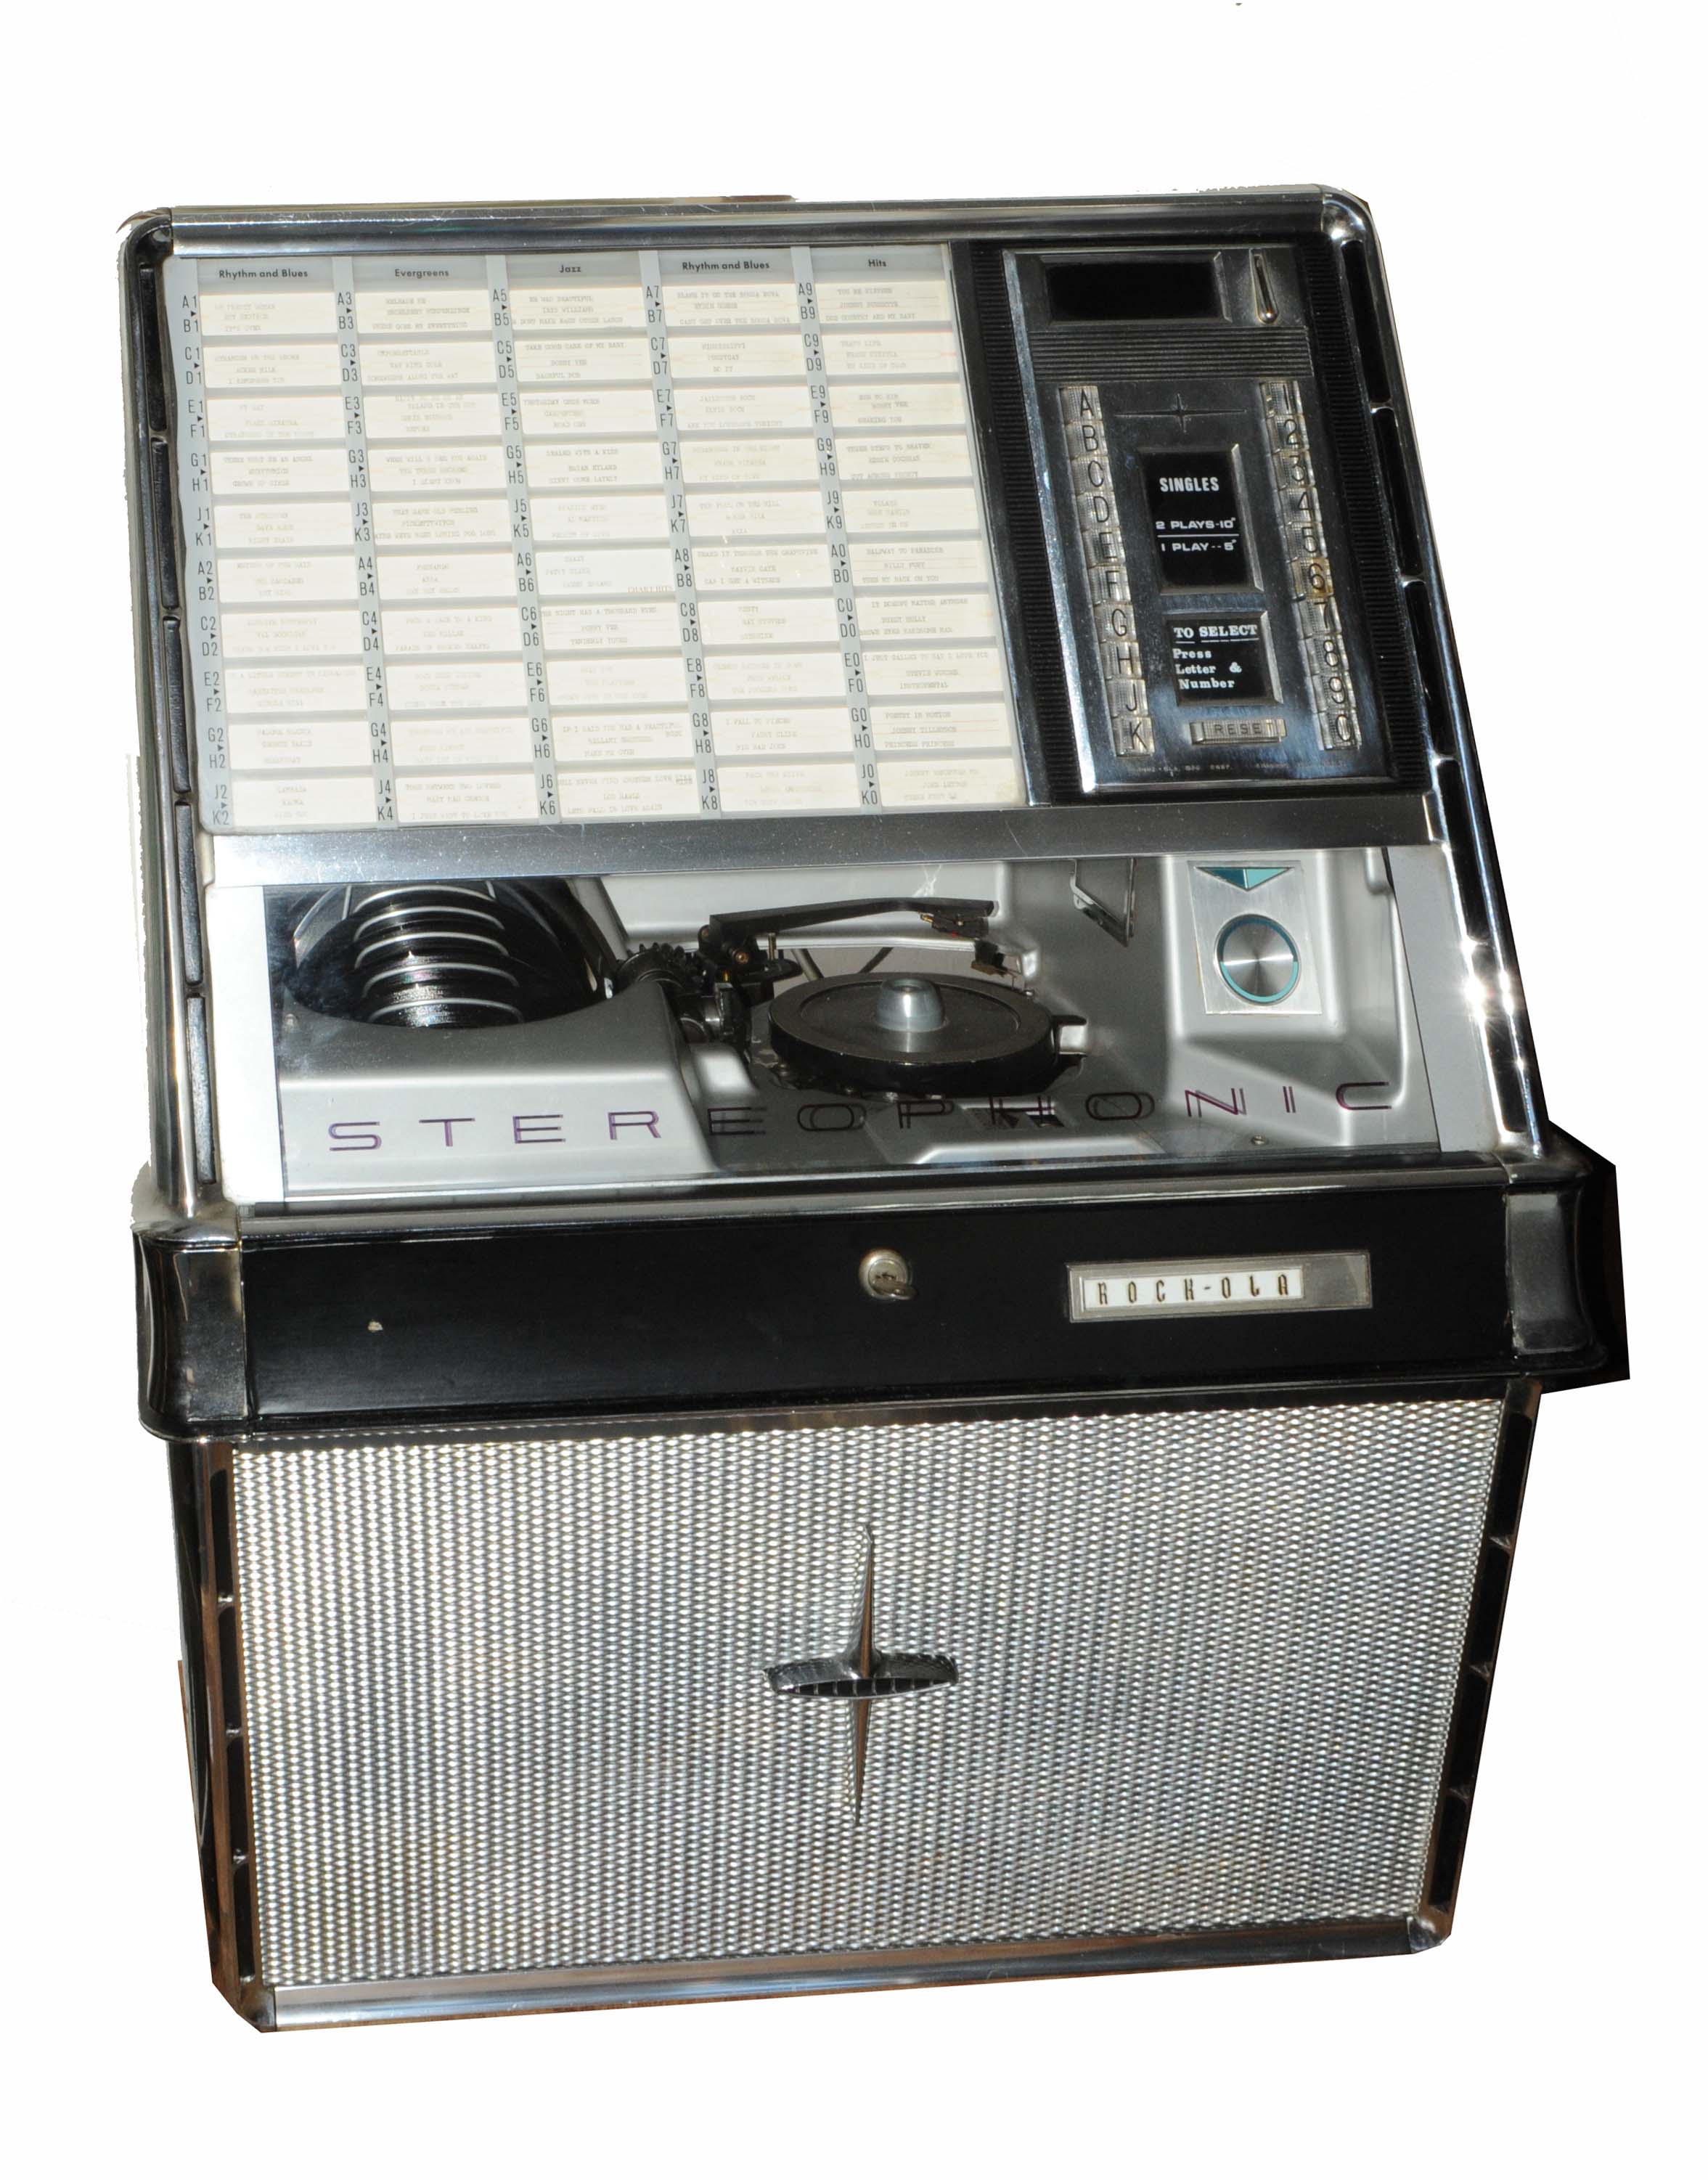 A ROCK-OLA 430 STEREOPHONIC JUKE BOX holding fifty singles and standing on original chromium